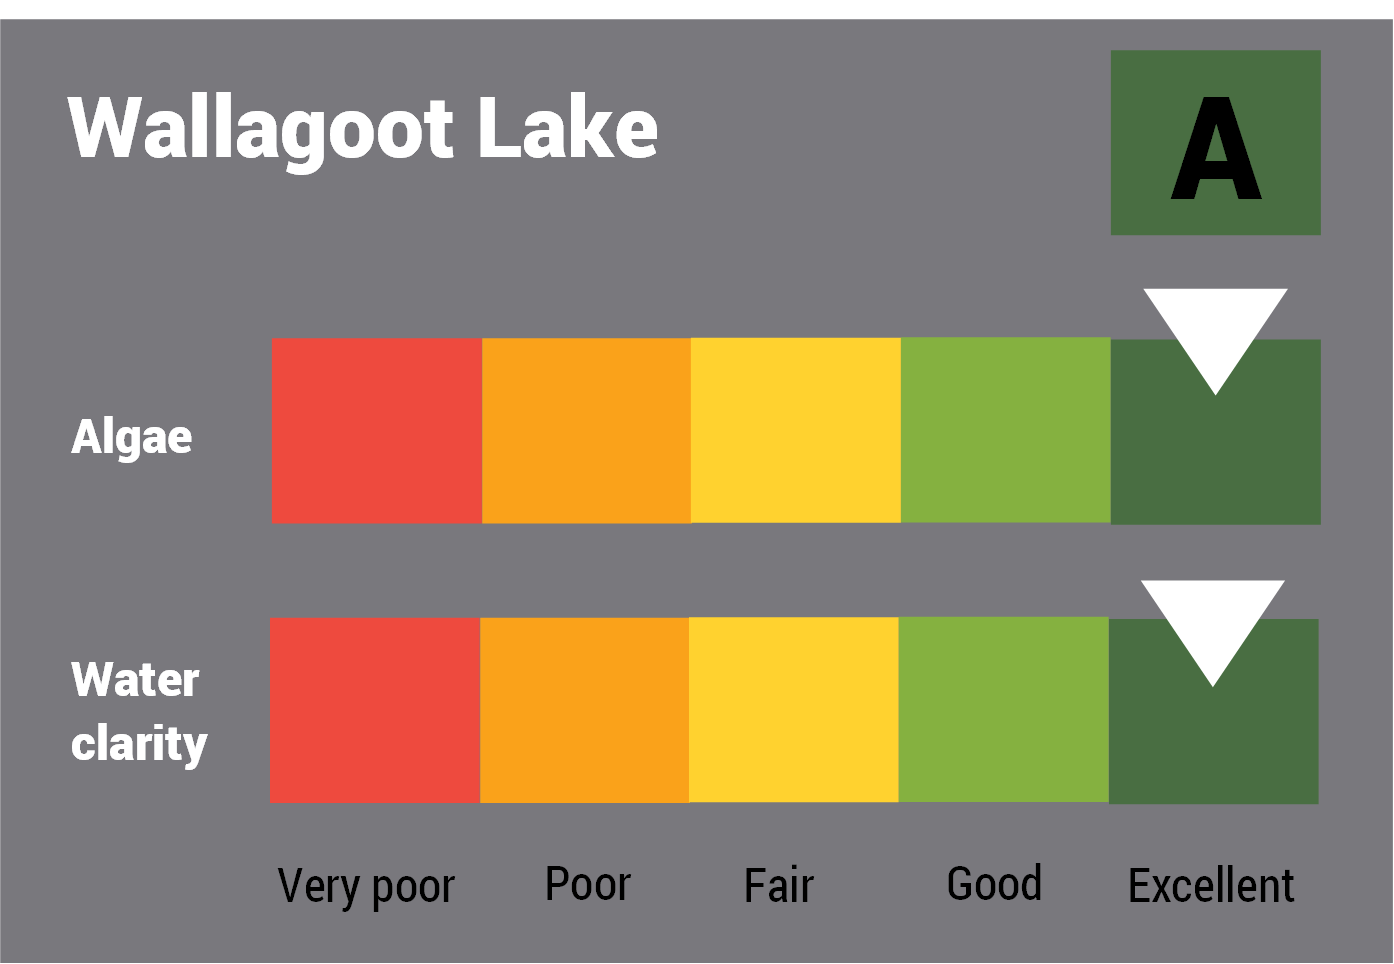 Wallagoot Lake water quality report card for algae and water clarity showing colour-coded ratings (red, orange, yellow, light green and dark green, which represent very poor, poor, fair, good and excellent, respectively). Algae is rated 'good' and water clarity is rated 'excellent' giving an overall rating of 'good' or 'B'.